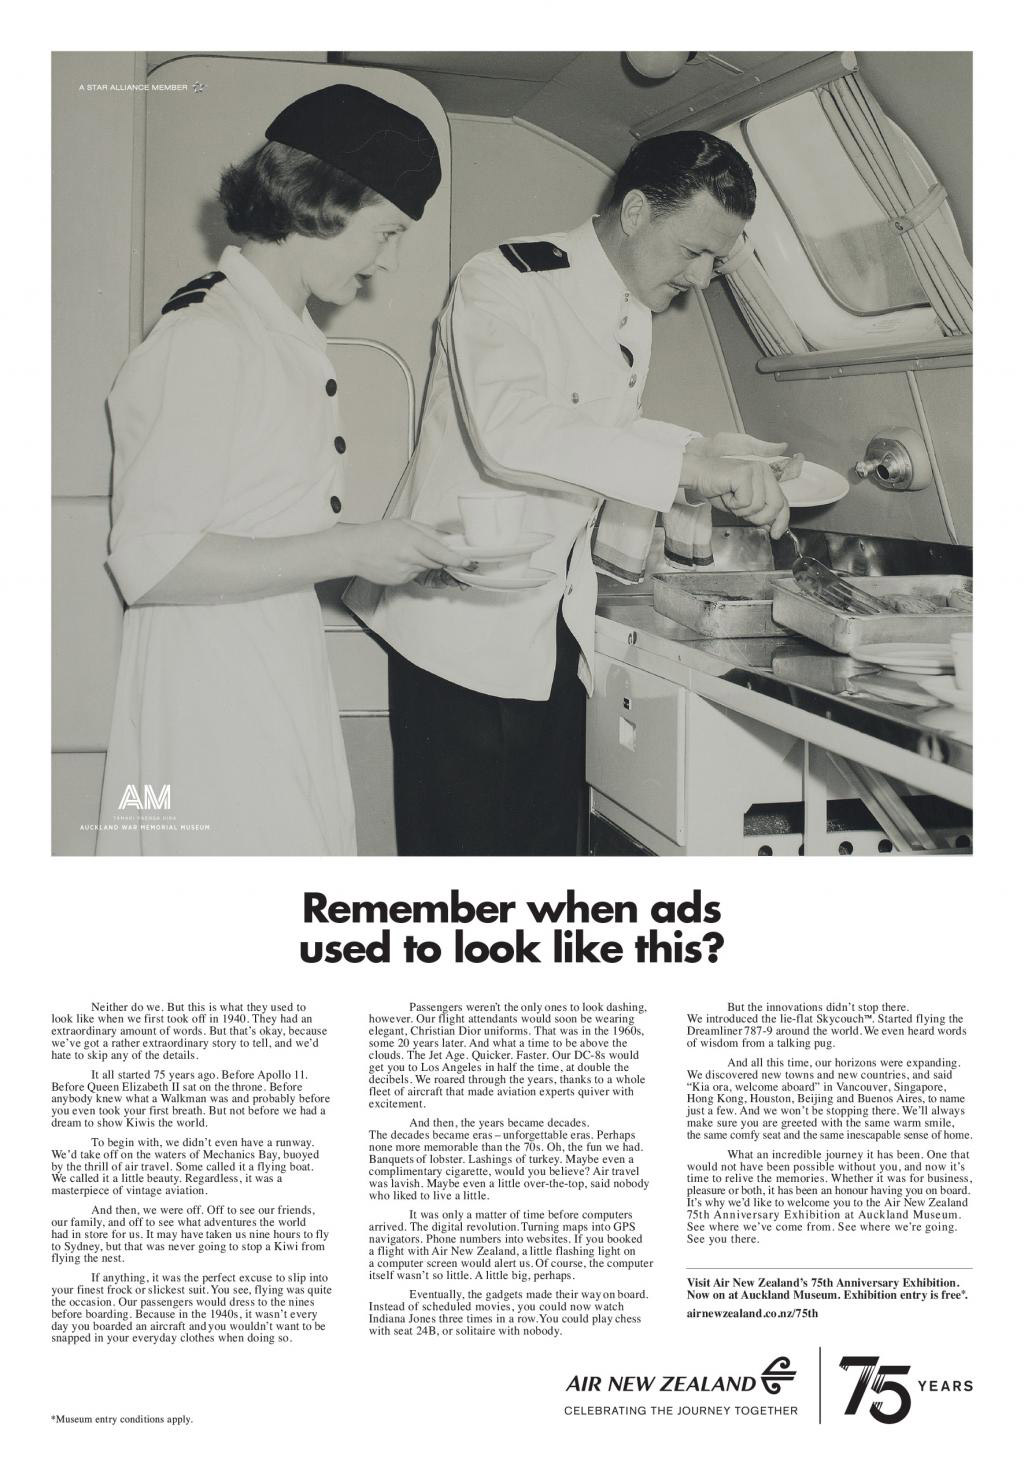 Air New Zealand: "Remember when ads used to look like this?" Campaigns of the World®